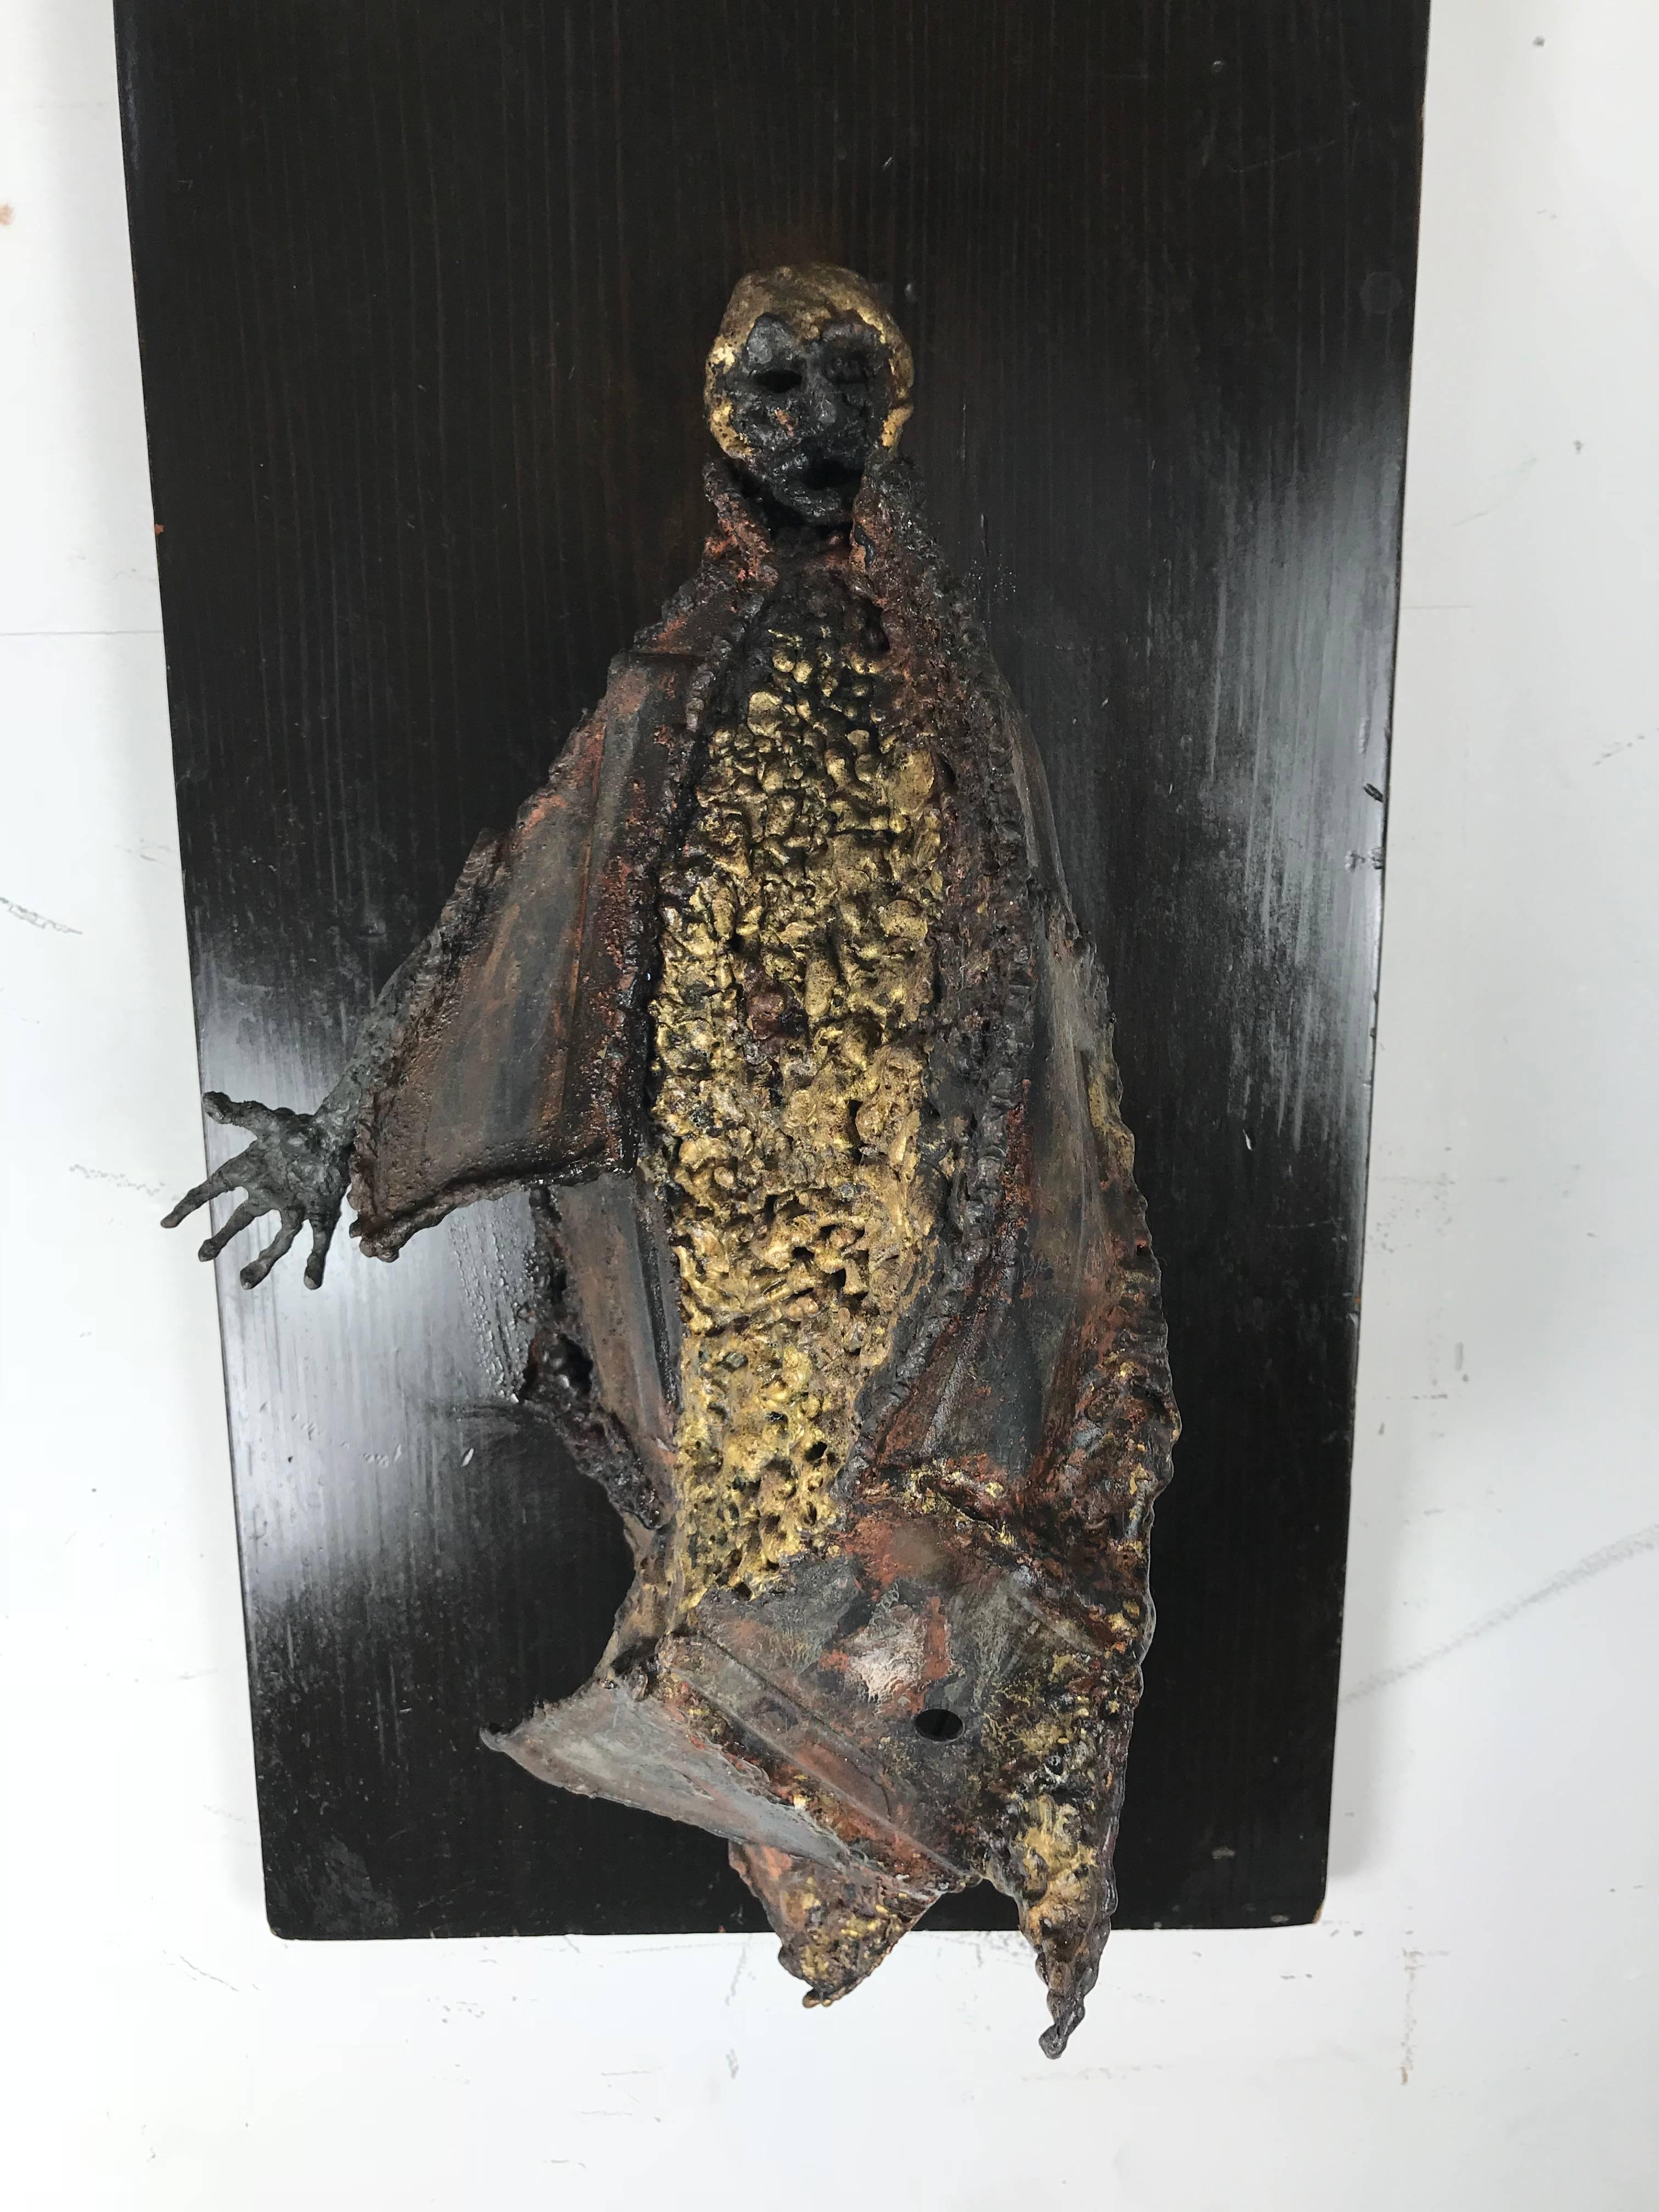 Unusual Brutalist bronze figure mounted sculpture, emotionally charged, raw imagery, beautifully hand executed, depicting cloaked person amazing texture and color, surface man measures 17 inches high x 8 inches wide x 6 inches deep.